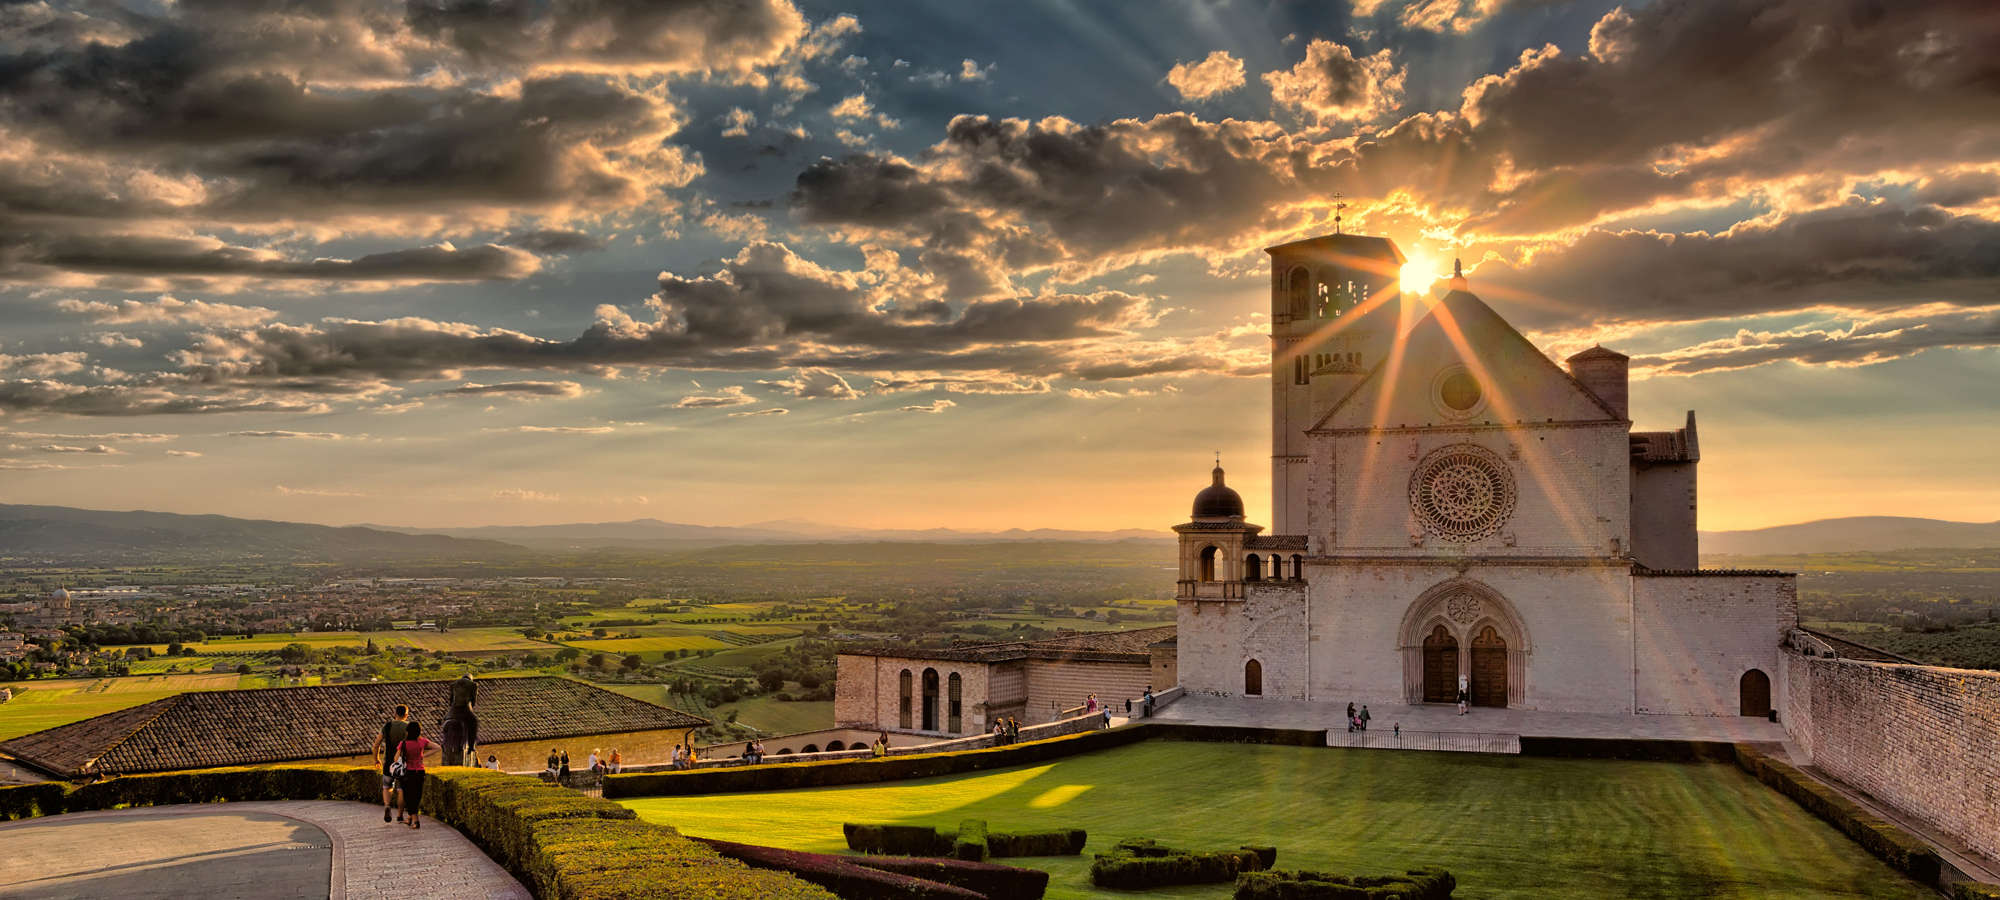 Amazing Assisi Pictures & Backgrounds